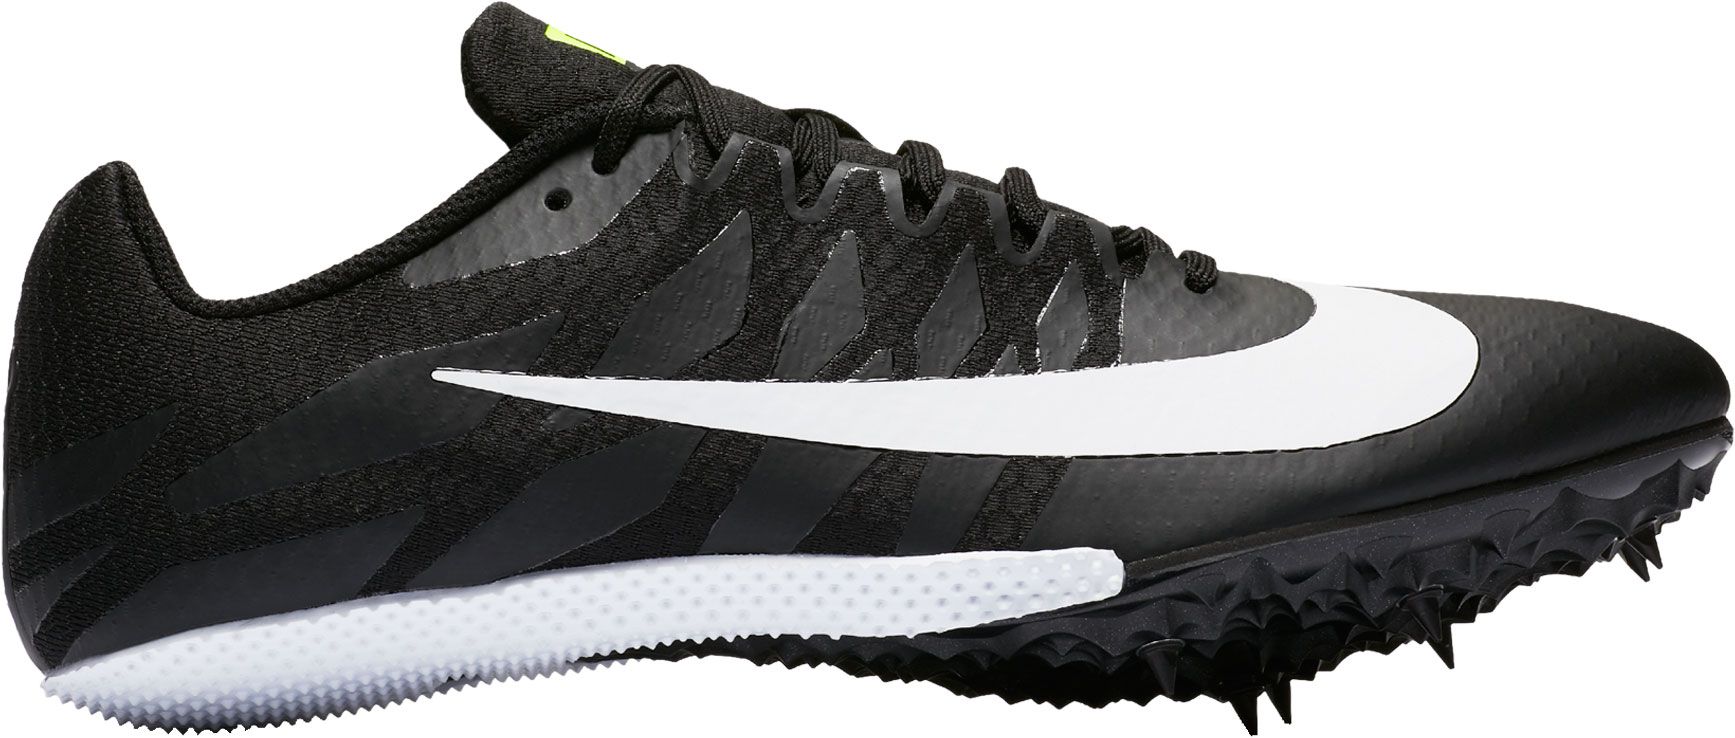 Zoom Rival S 9 Track and Field Shoes 